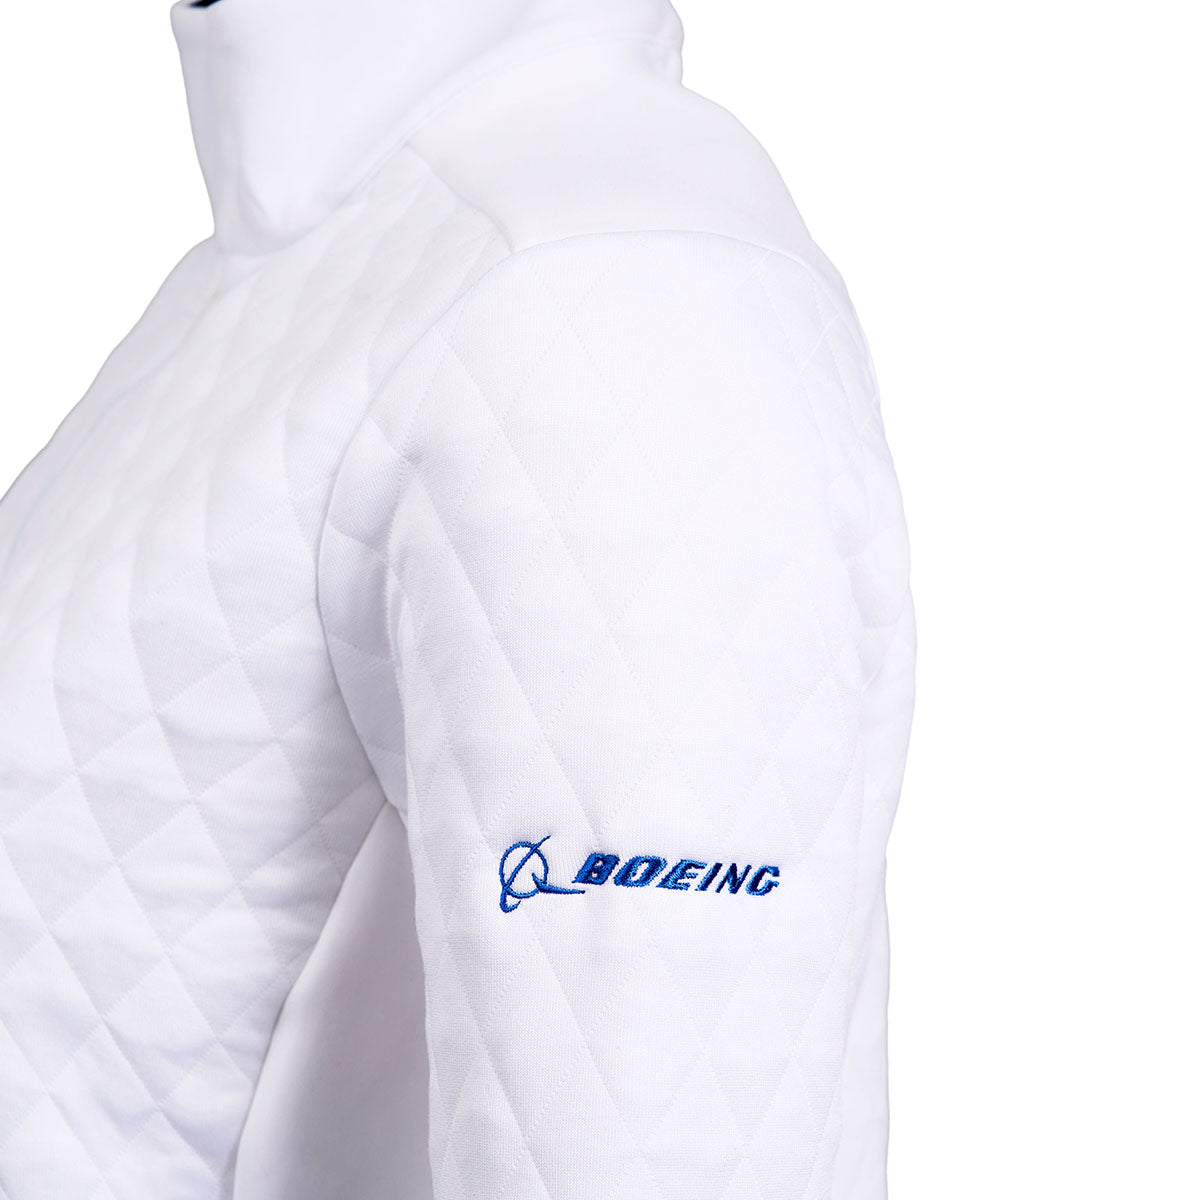 close up of Boeing logo on left arm in the brilliant white color